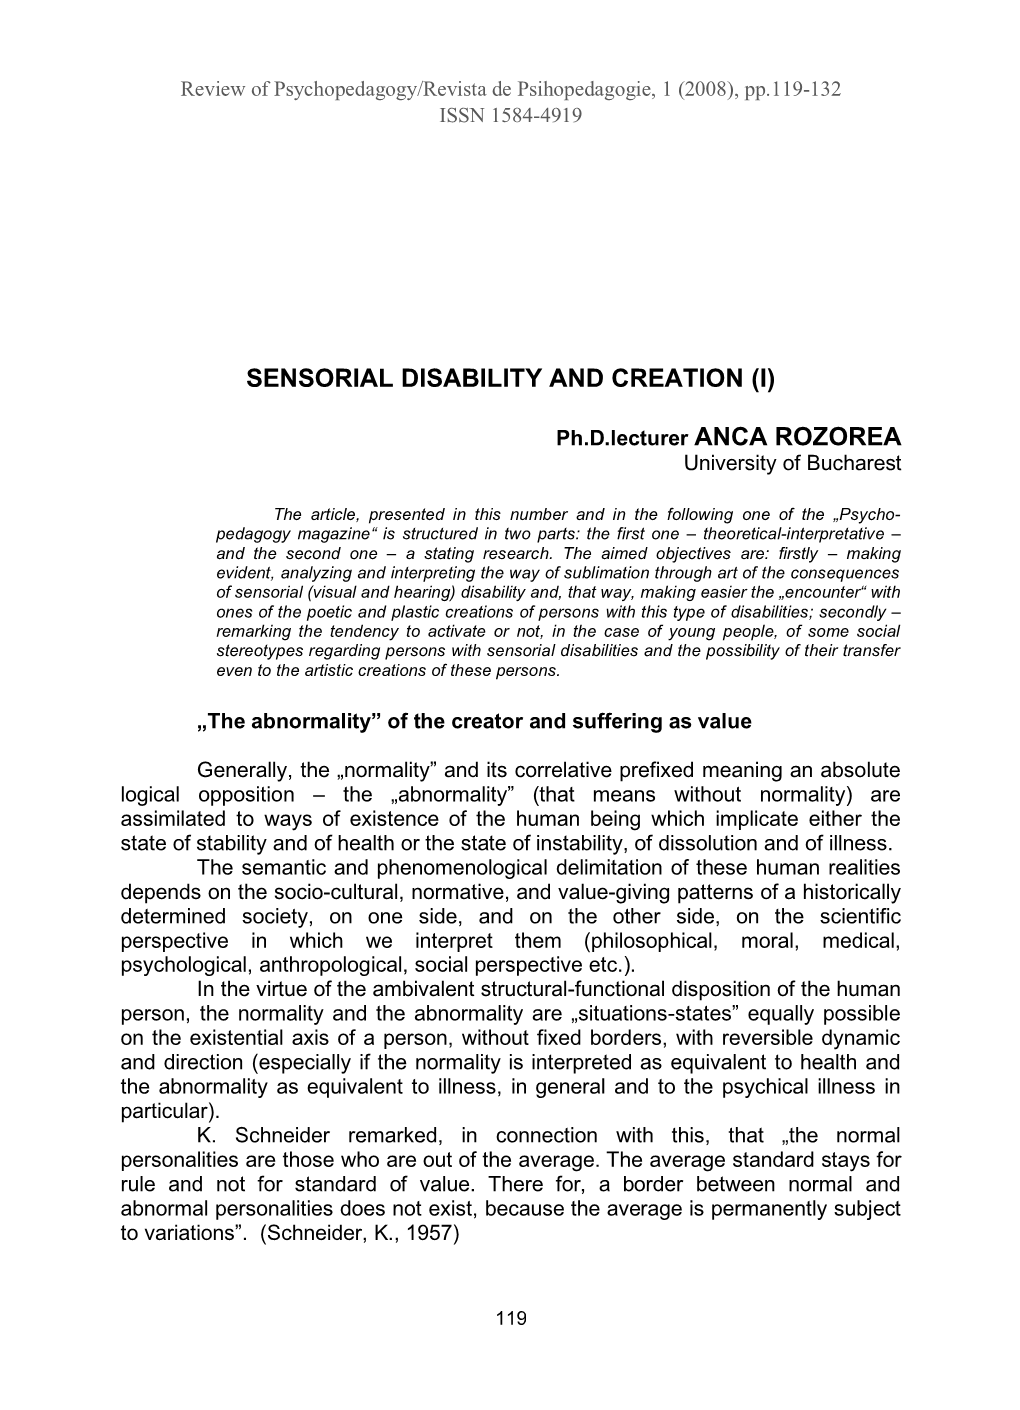 Sensorial Disability and Creation (I)